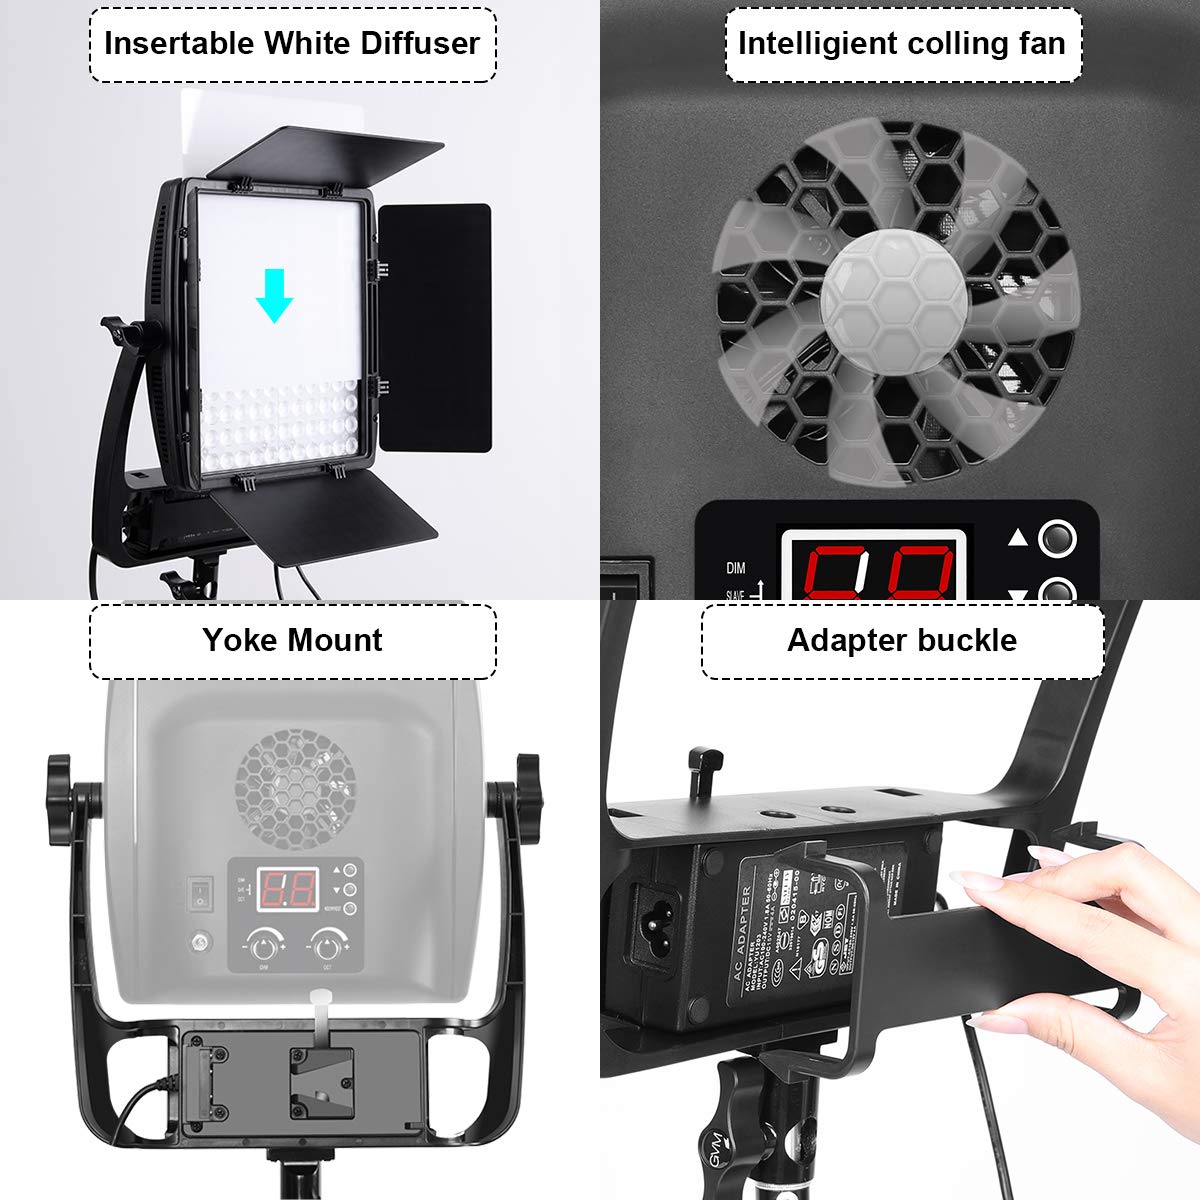 GVM 900D LED Video Light，Dimmable Bi-Color and Stand video Lighting Kit, APP Intelligent Control System， CRI97，3200-5600K fo YouTube Studio Photography， Outdoor Video Shooting Lighting (2 Packs)